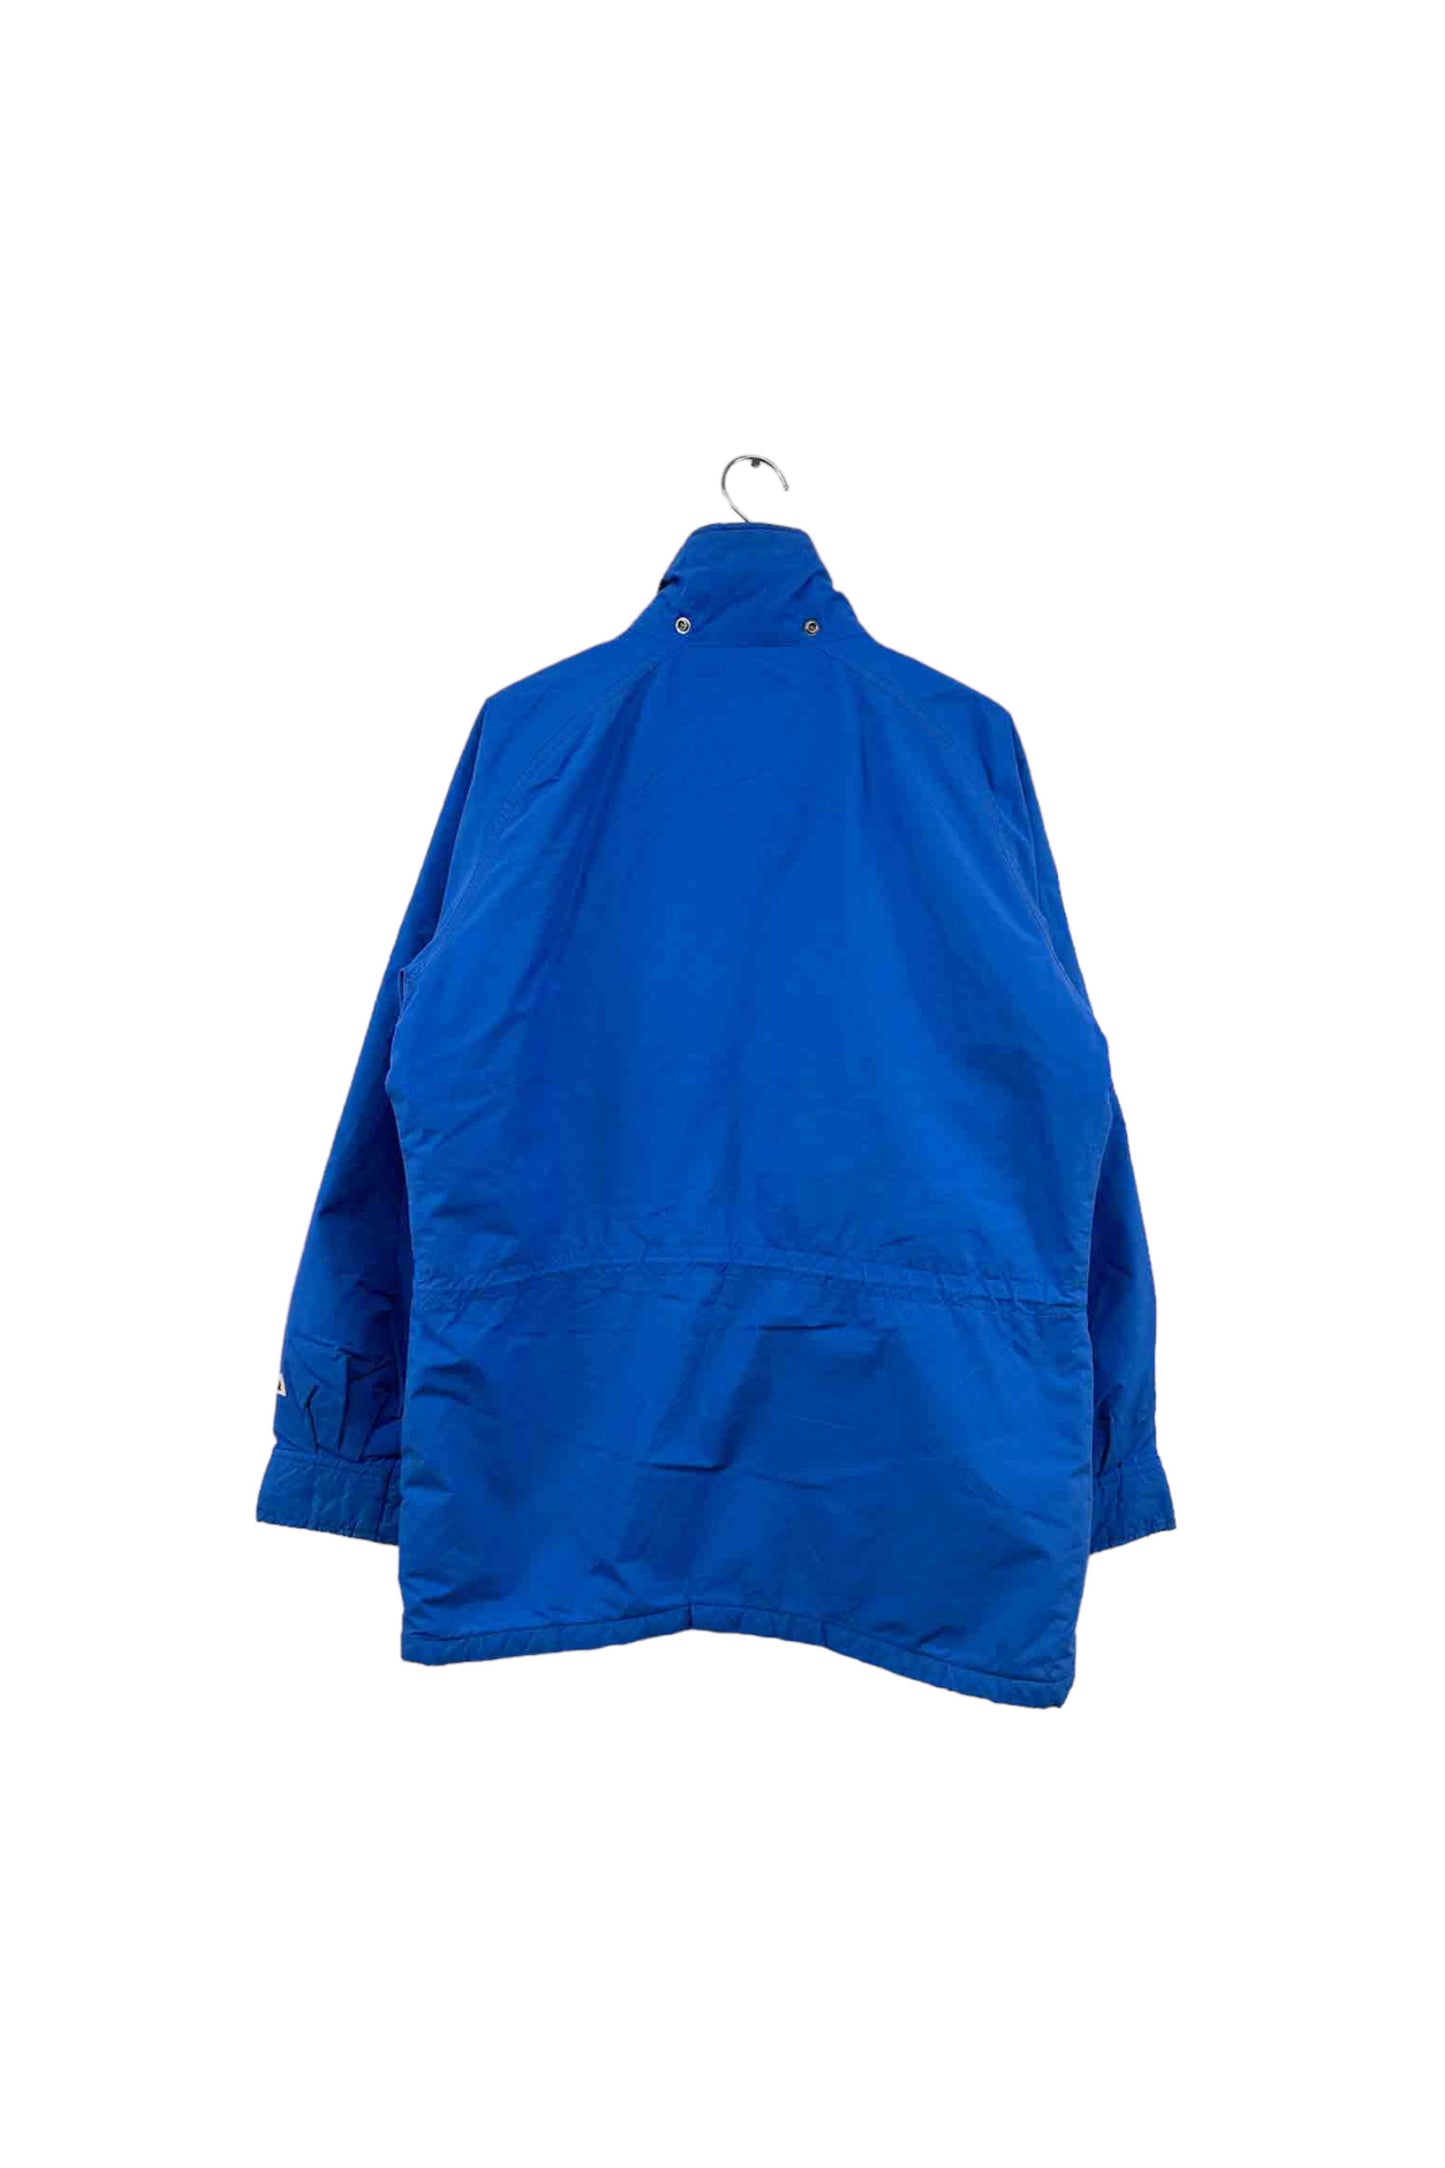 Made in USA THE NORTH FACE nylon jacket